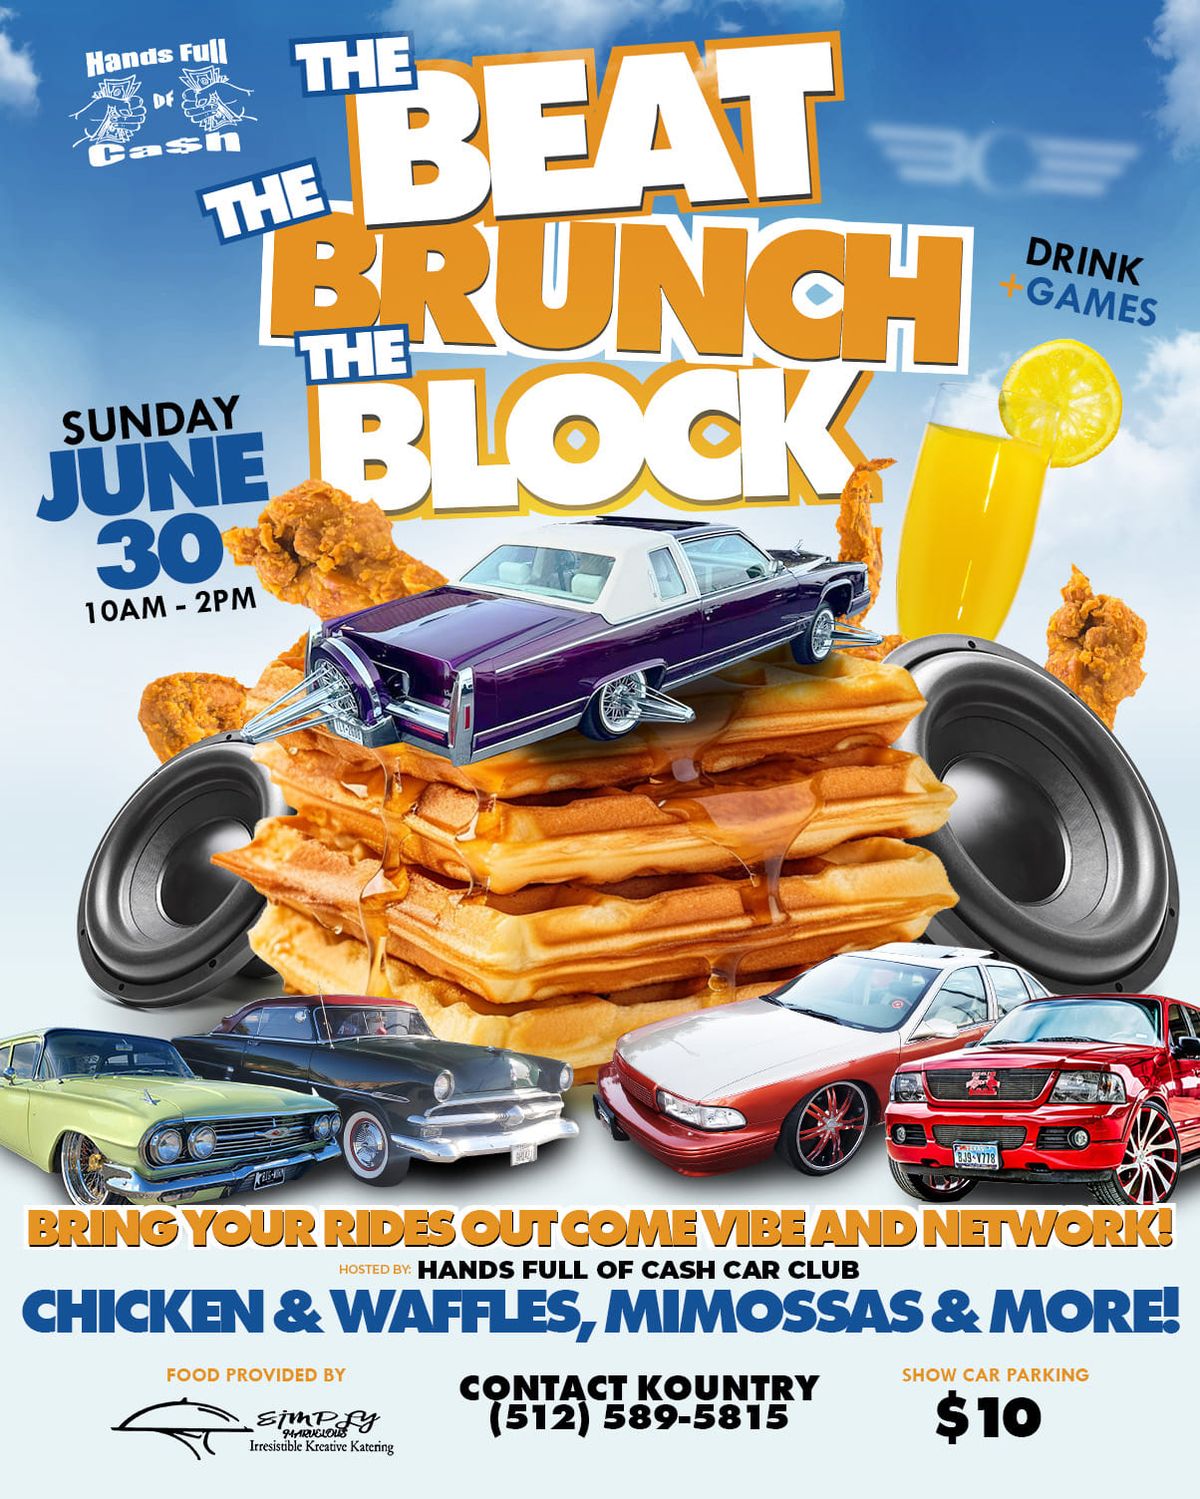 THE BEAT, THE BRUNCH, THE BLOCK